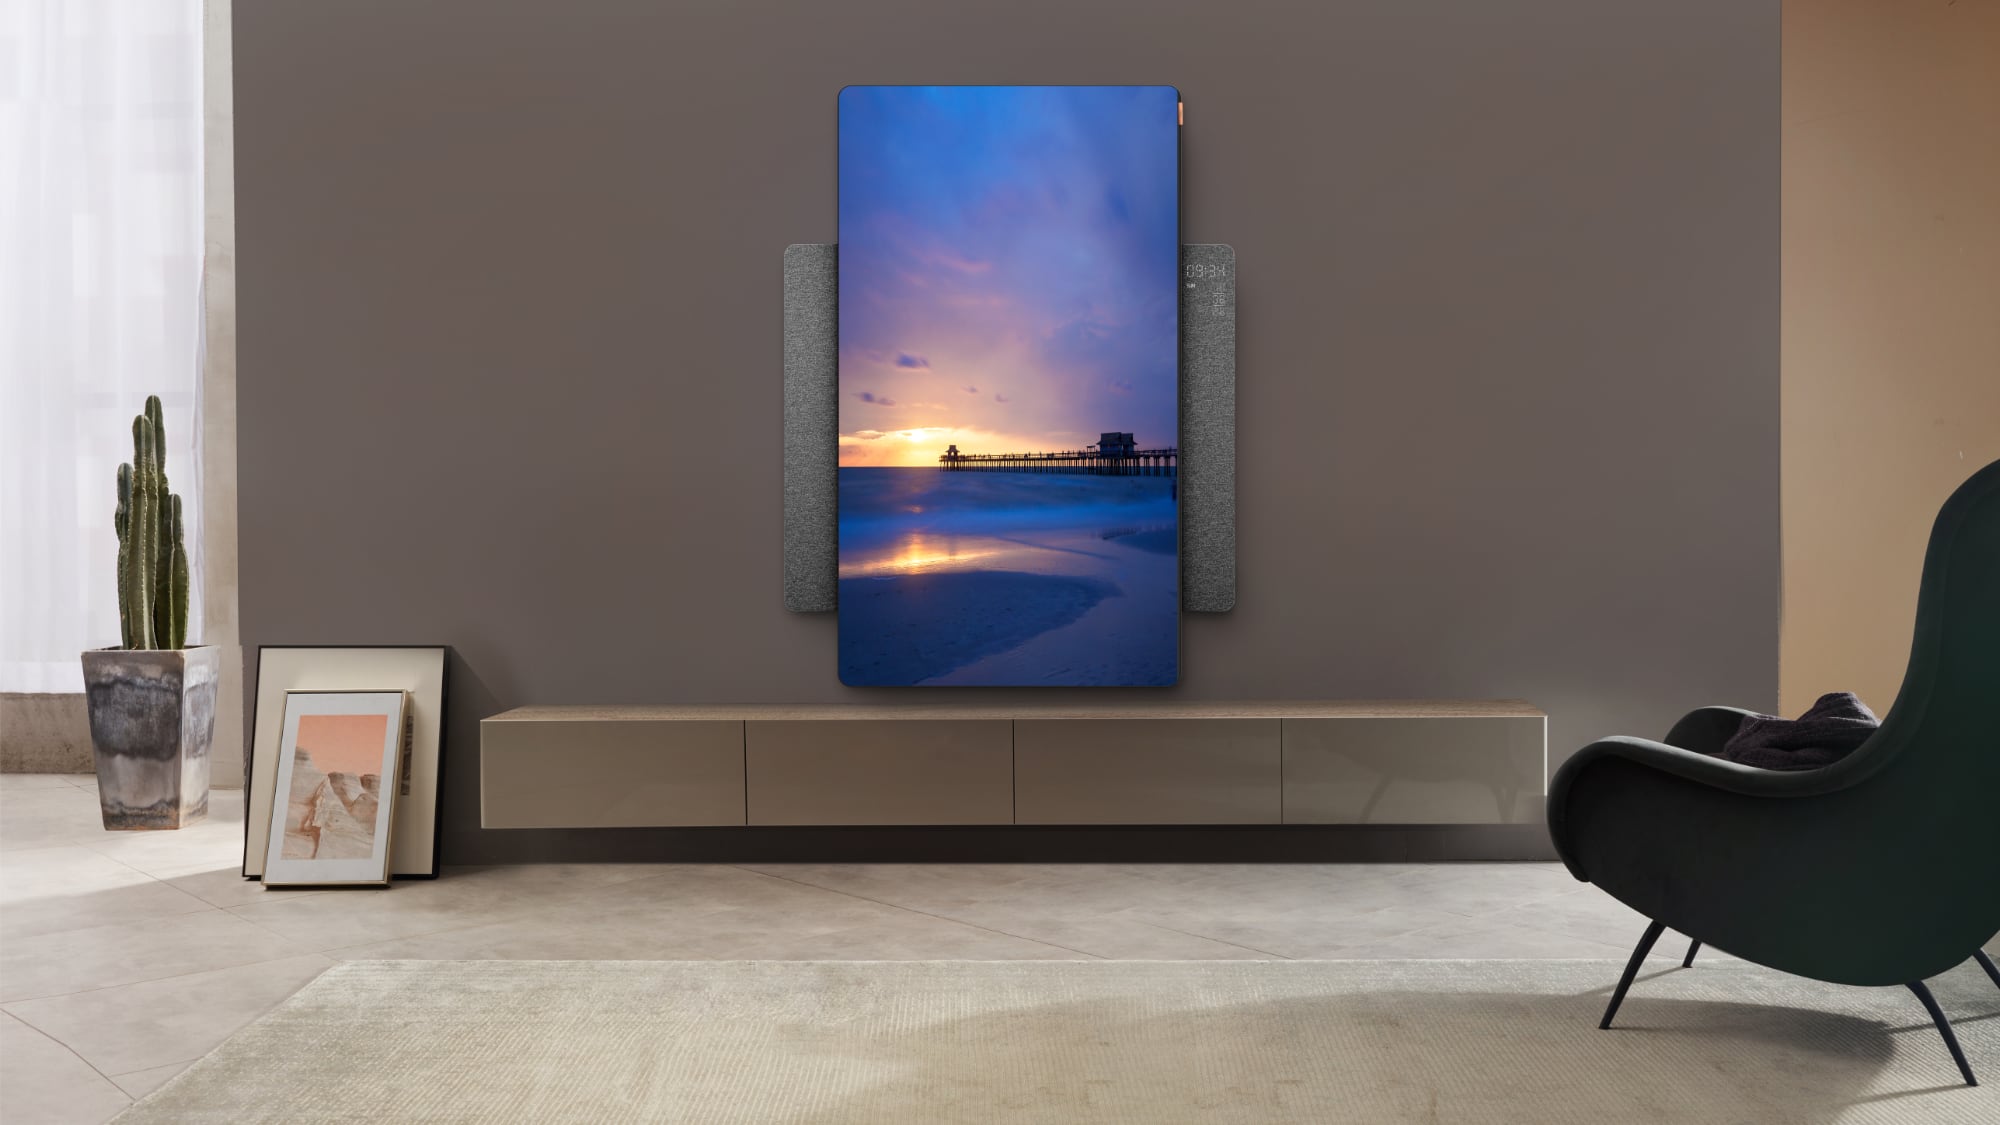 CES 2020: SERO is Samsung's TV for Millenials… that turns!